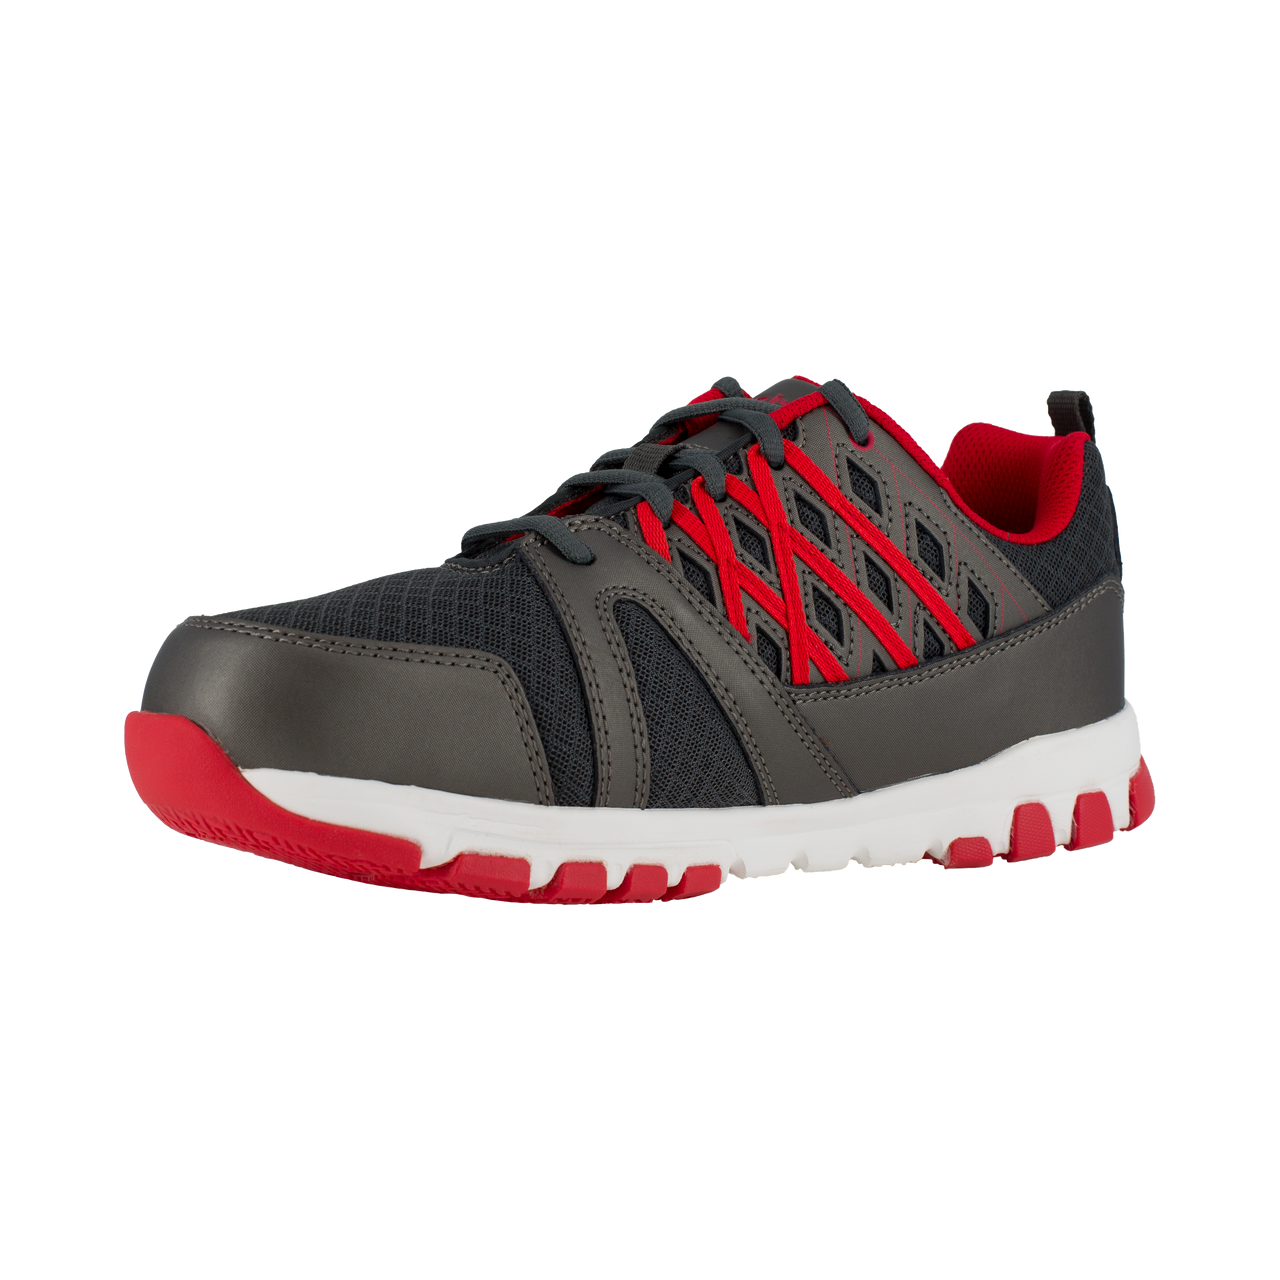 Reebok Sublite Work - RB4005 - Men's Athletic Work Shoes - Grey & Red